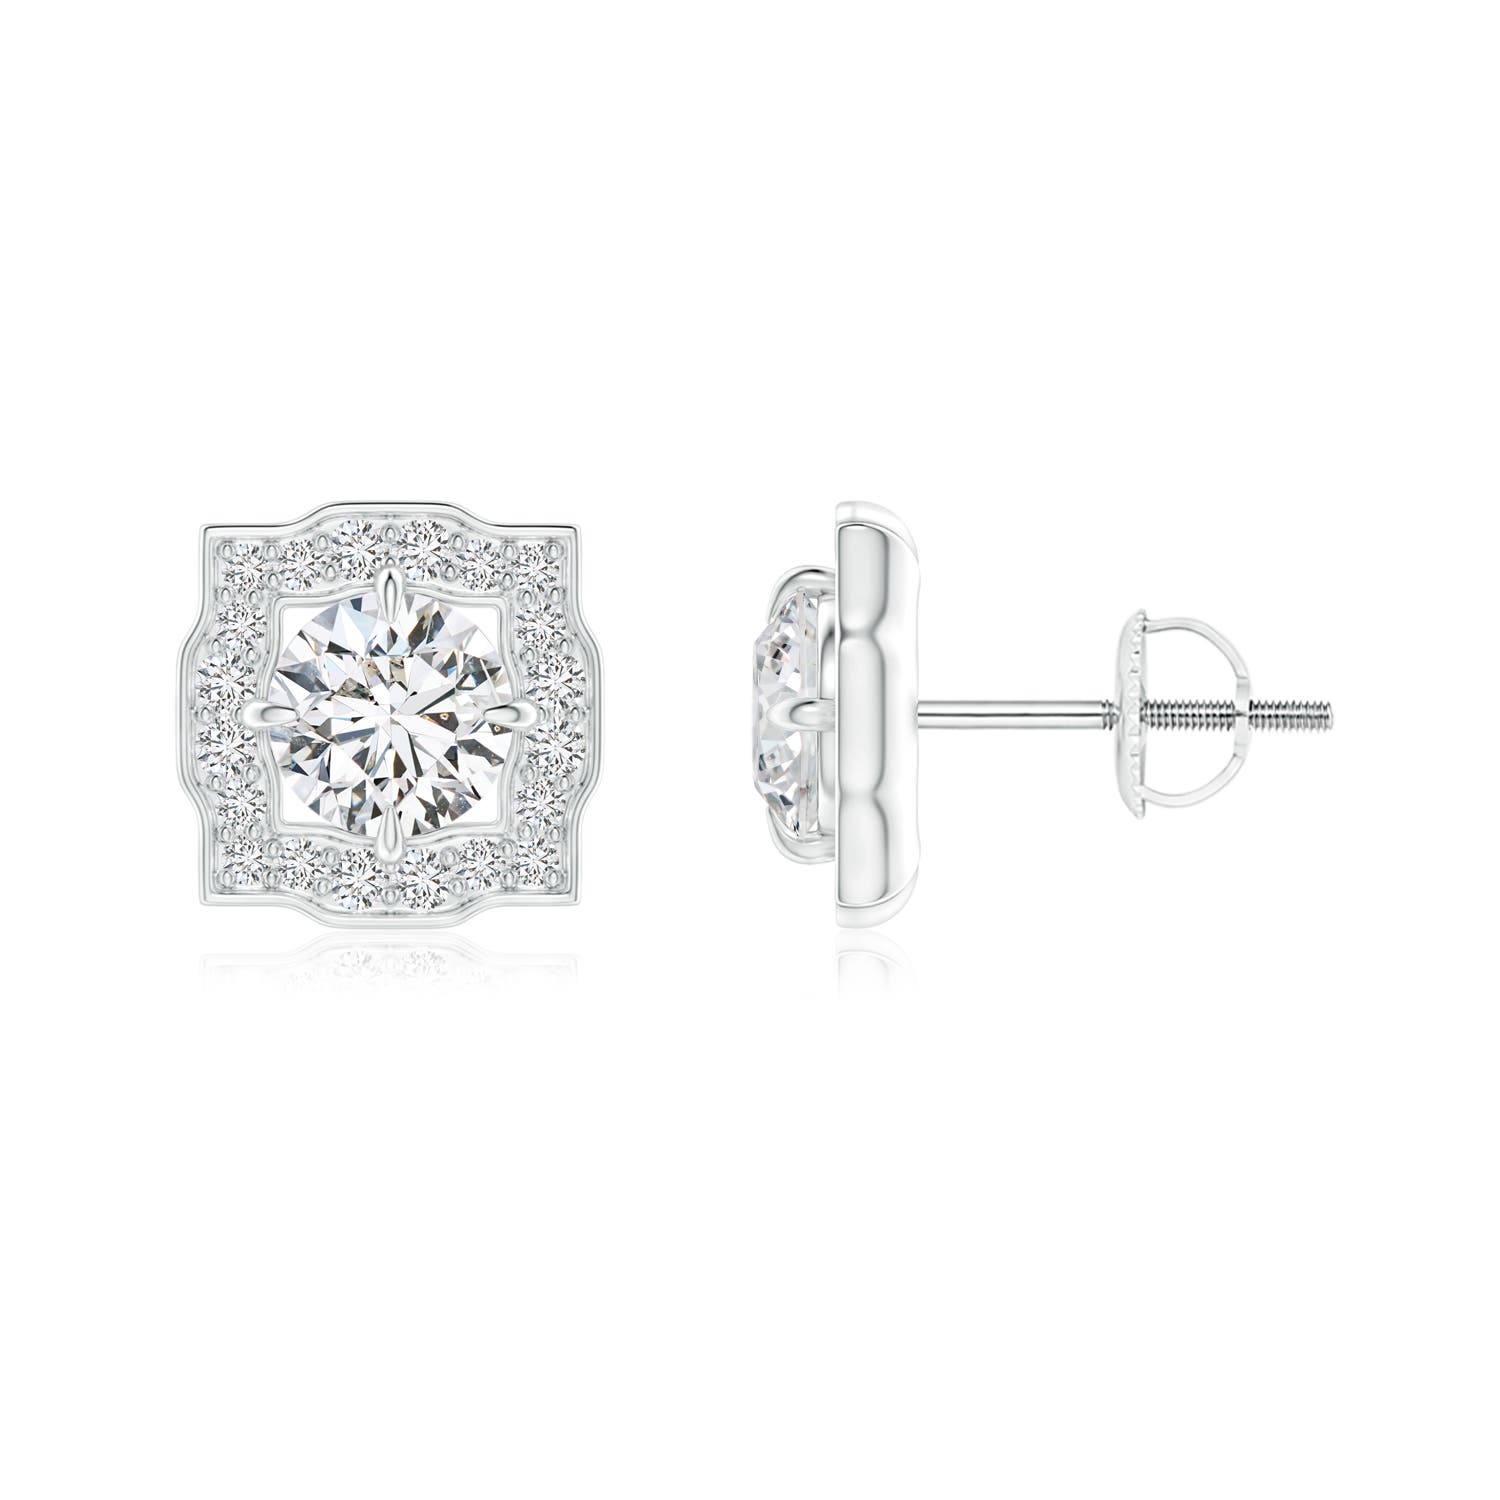 H, SI2 / 0.83 CT / 14 KT White Gold